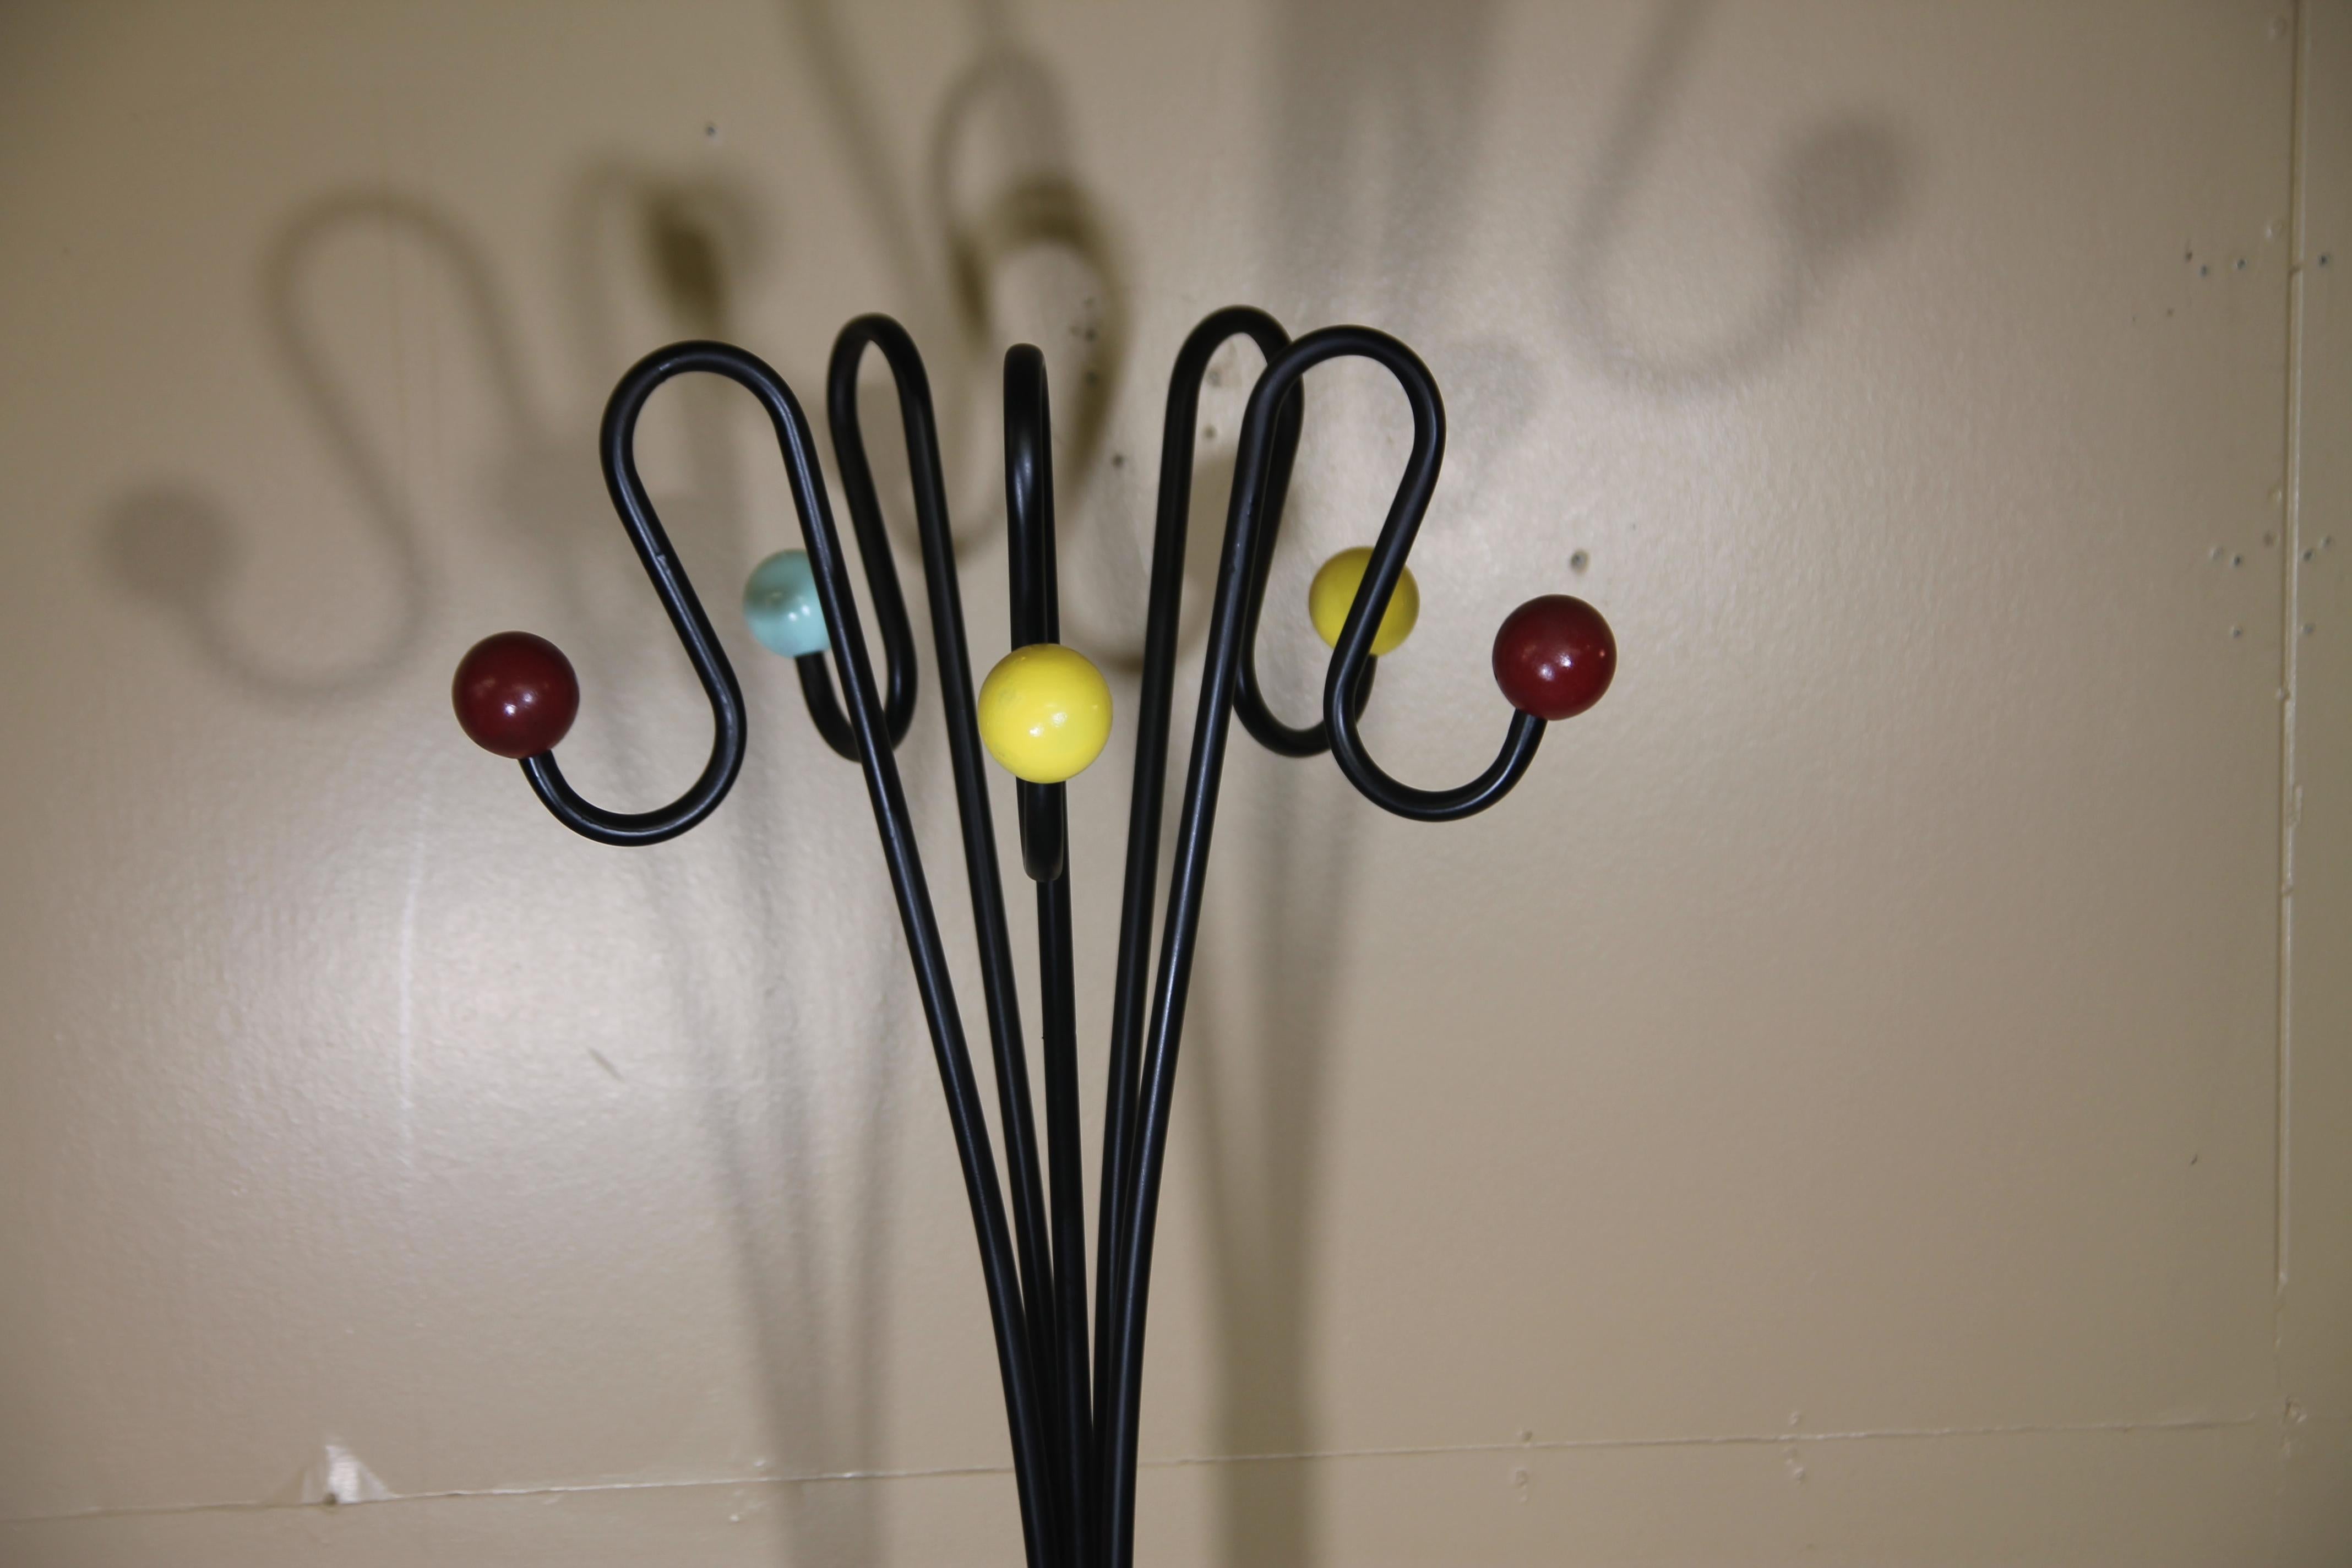 Great Italian hat rack. This was an old new stock frame and wood balls that have been newly painted. Frames were imported into the USA in the 1960s and remained untouched until we acquired them.